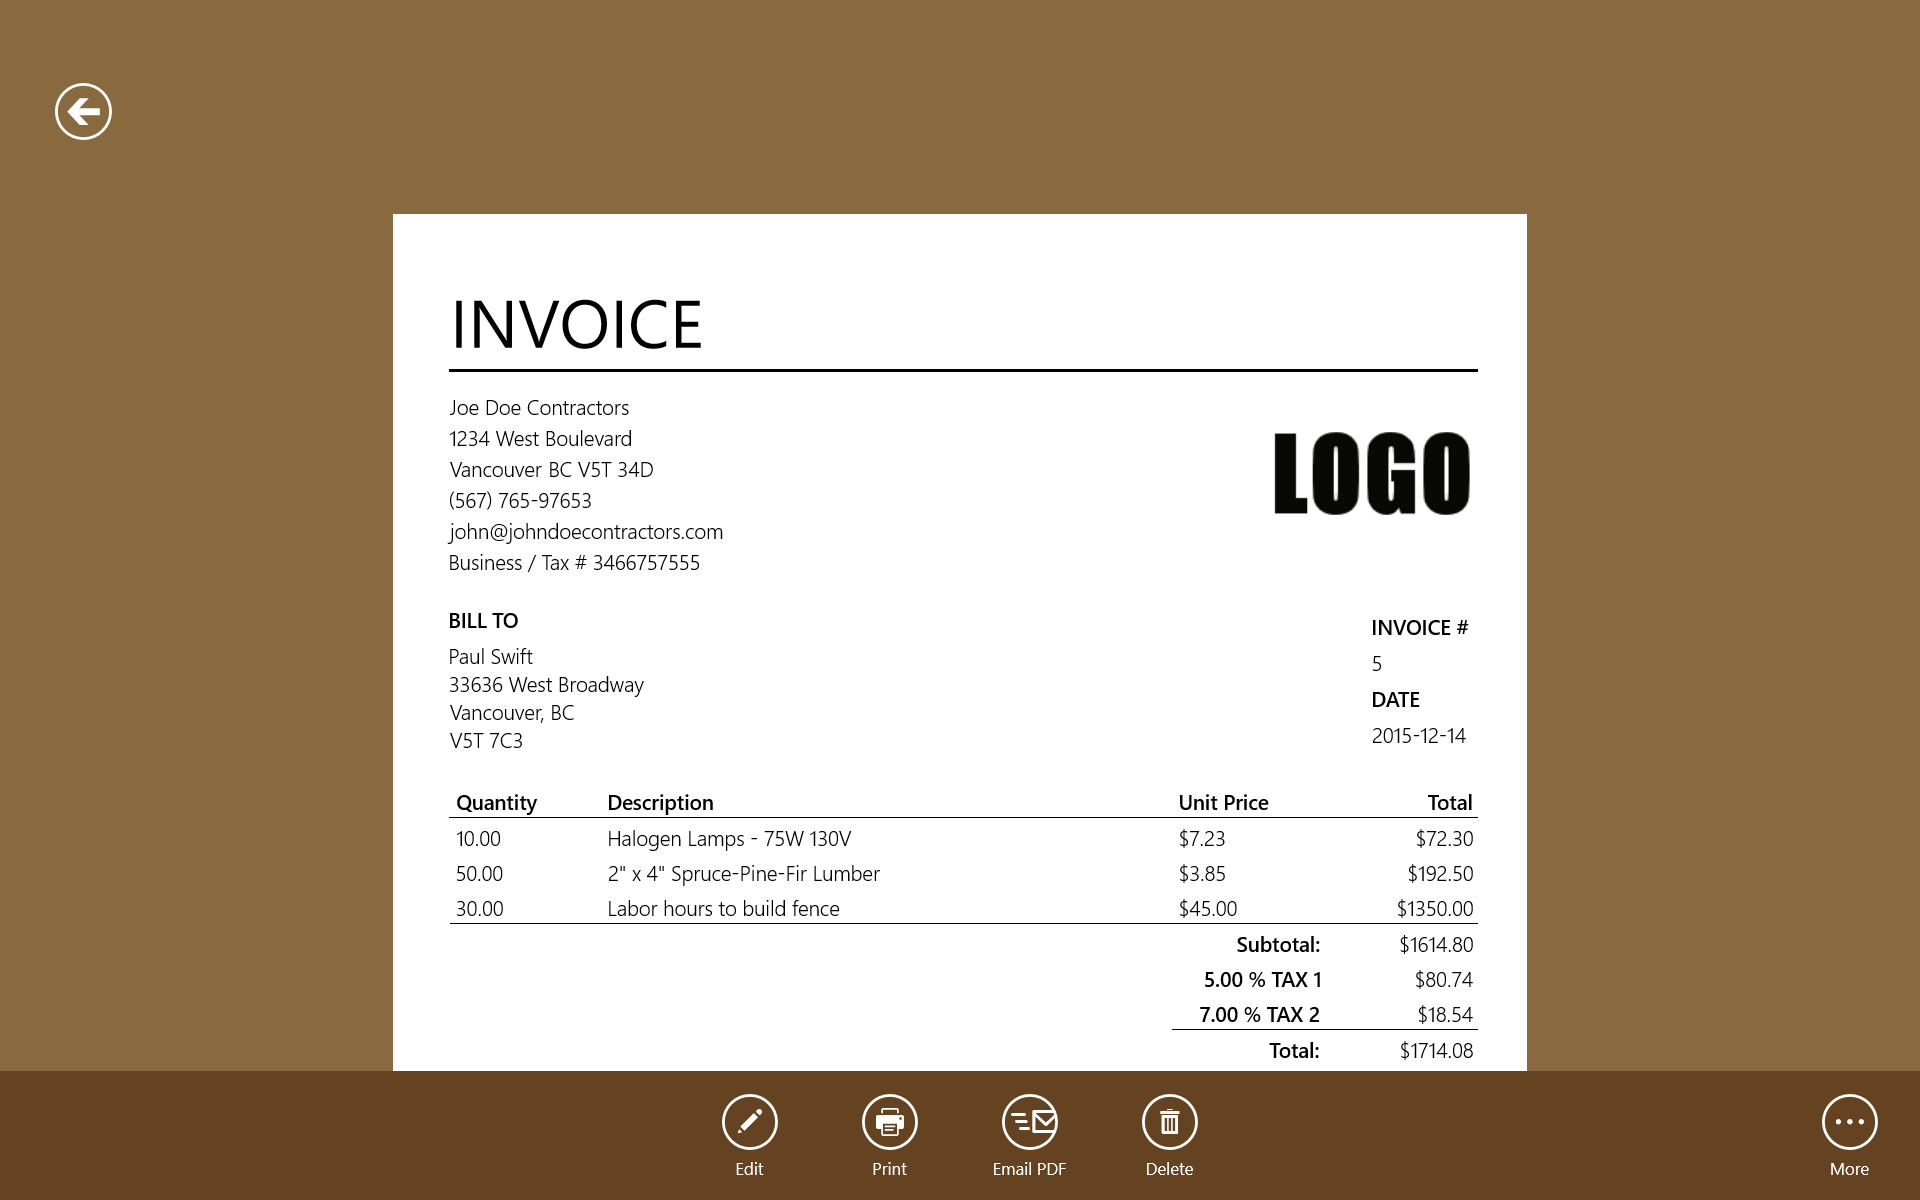 Create a professional looking invoice in a few minutes time and email it to your client.